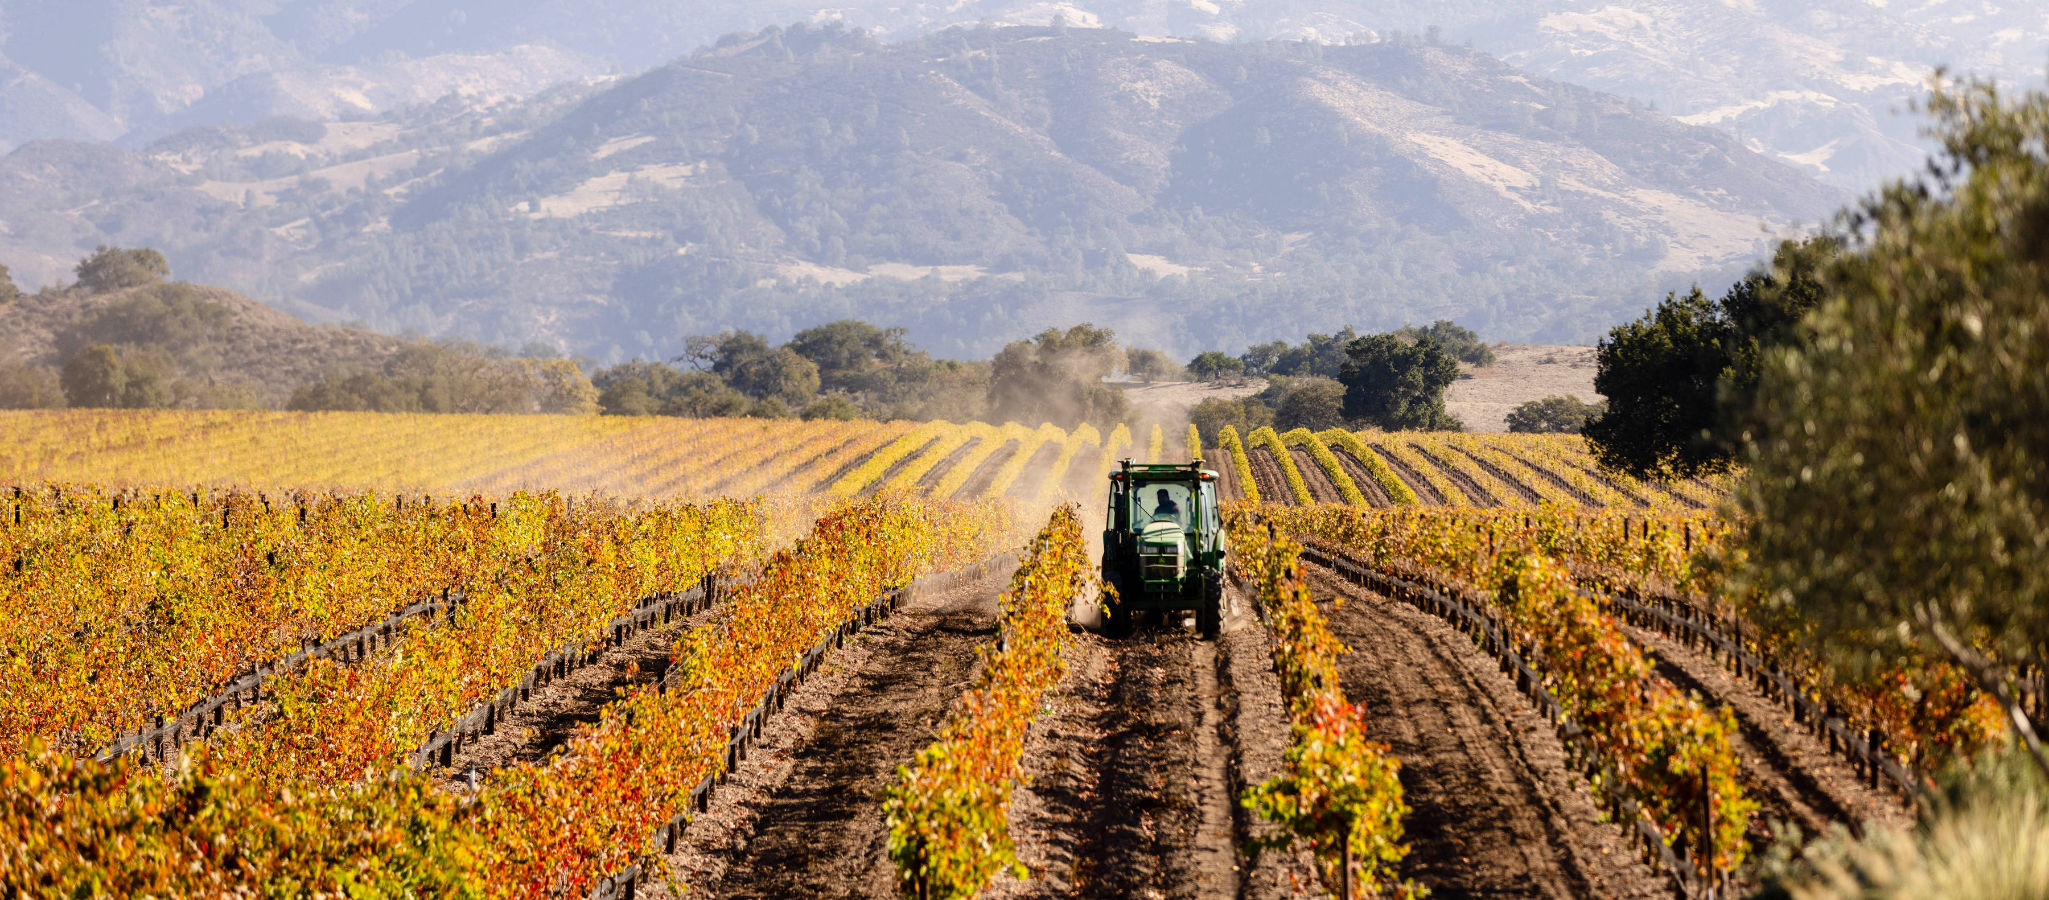 View of Rodney's Vineyard with tractor at the Fess Parker home ranch.